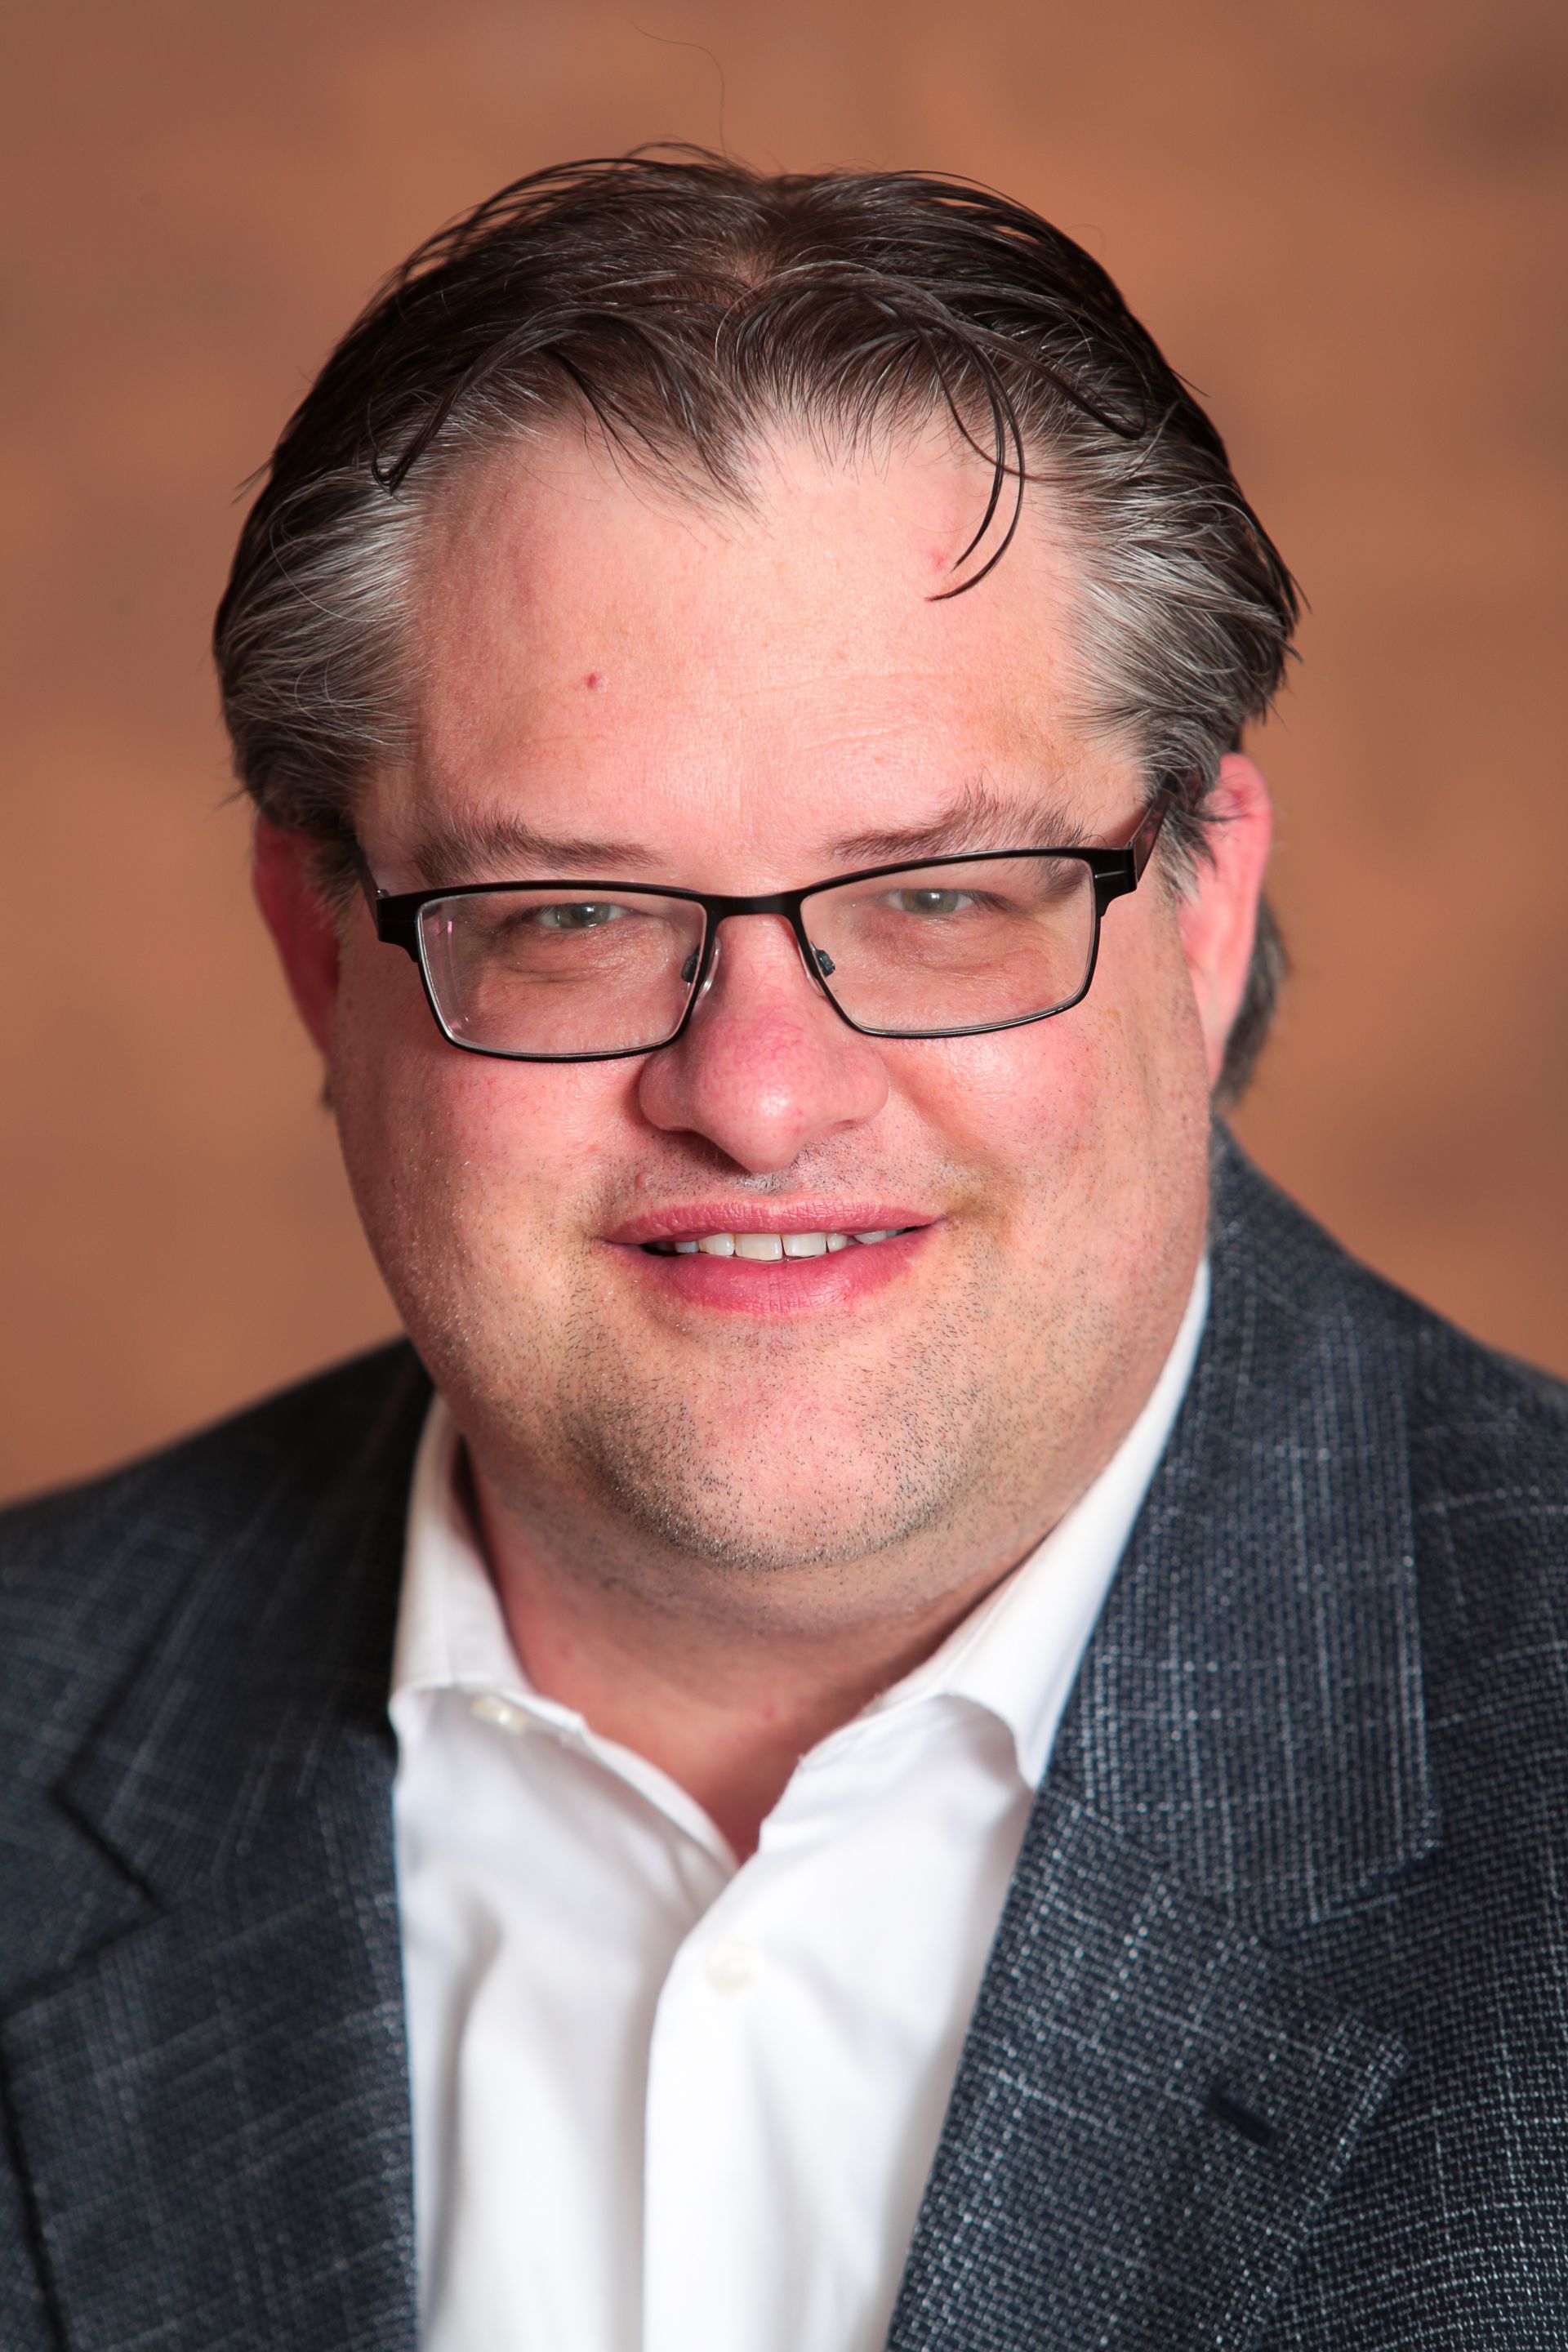 Image of a smiling white man with glasses in a suit jacket with white shirt in a formal portrait background 